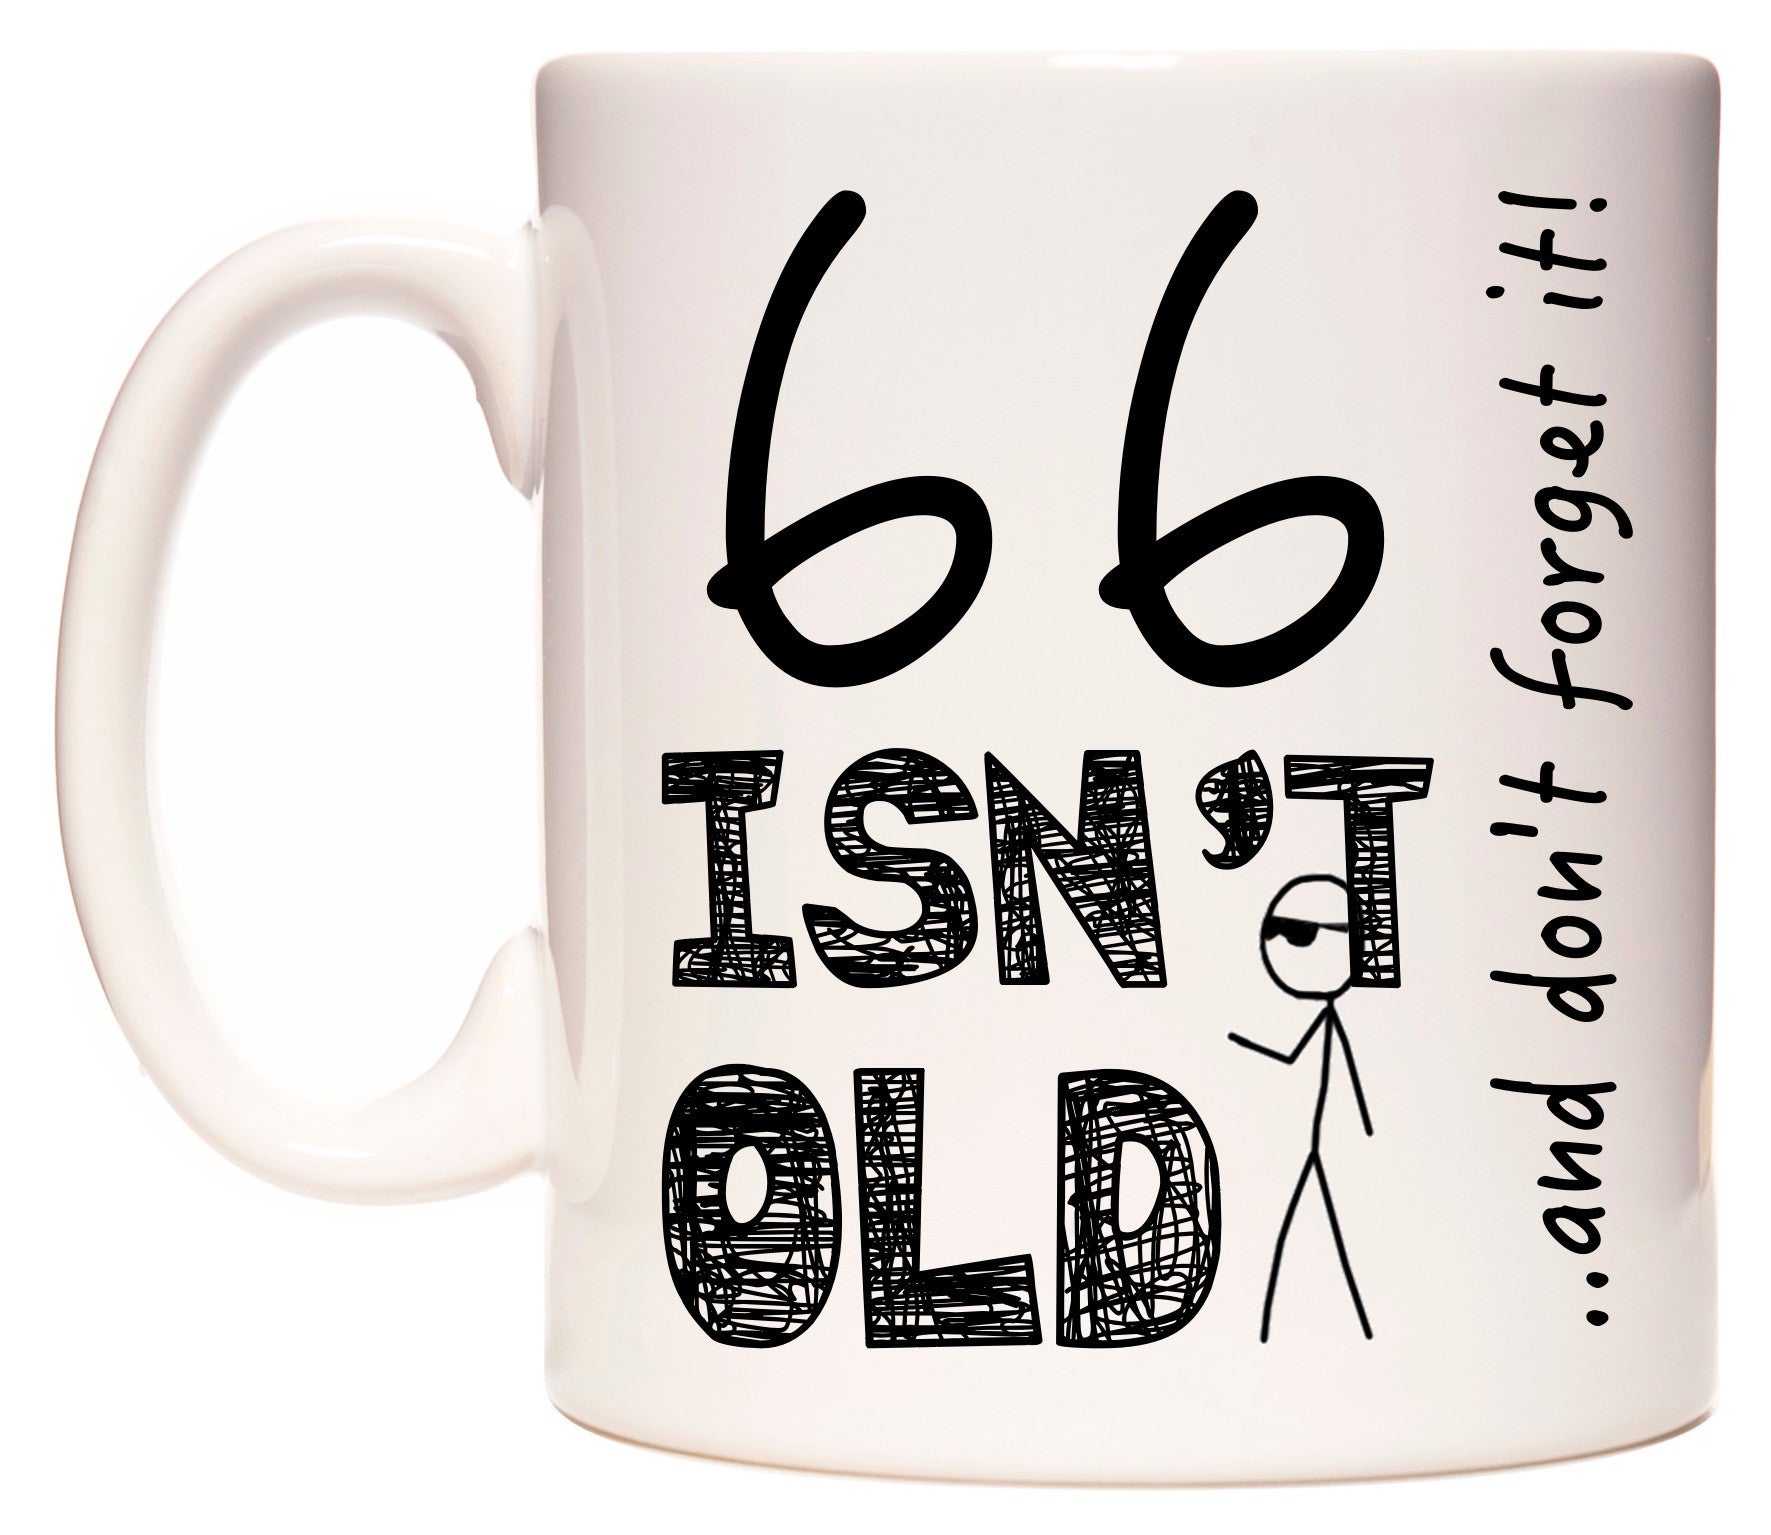 This mug features 66 Isn't Old